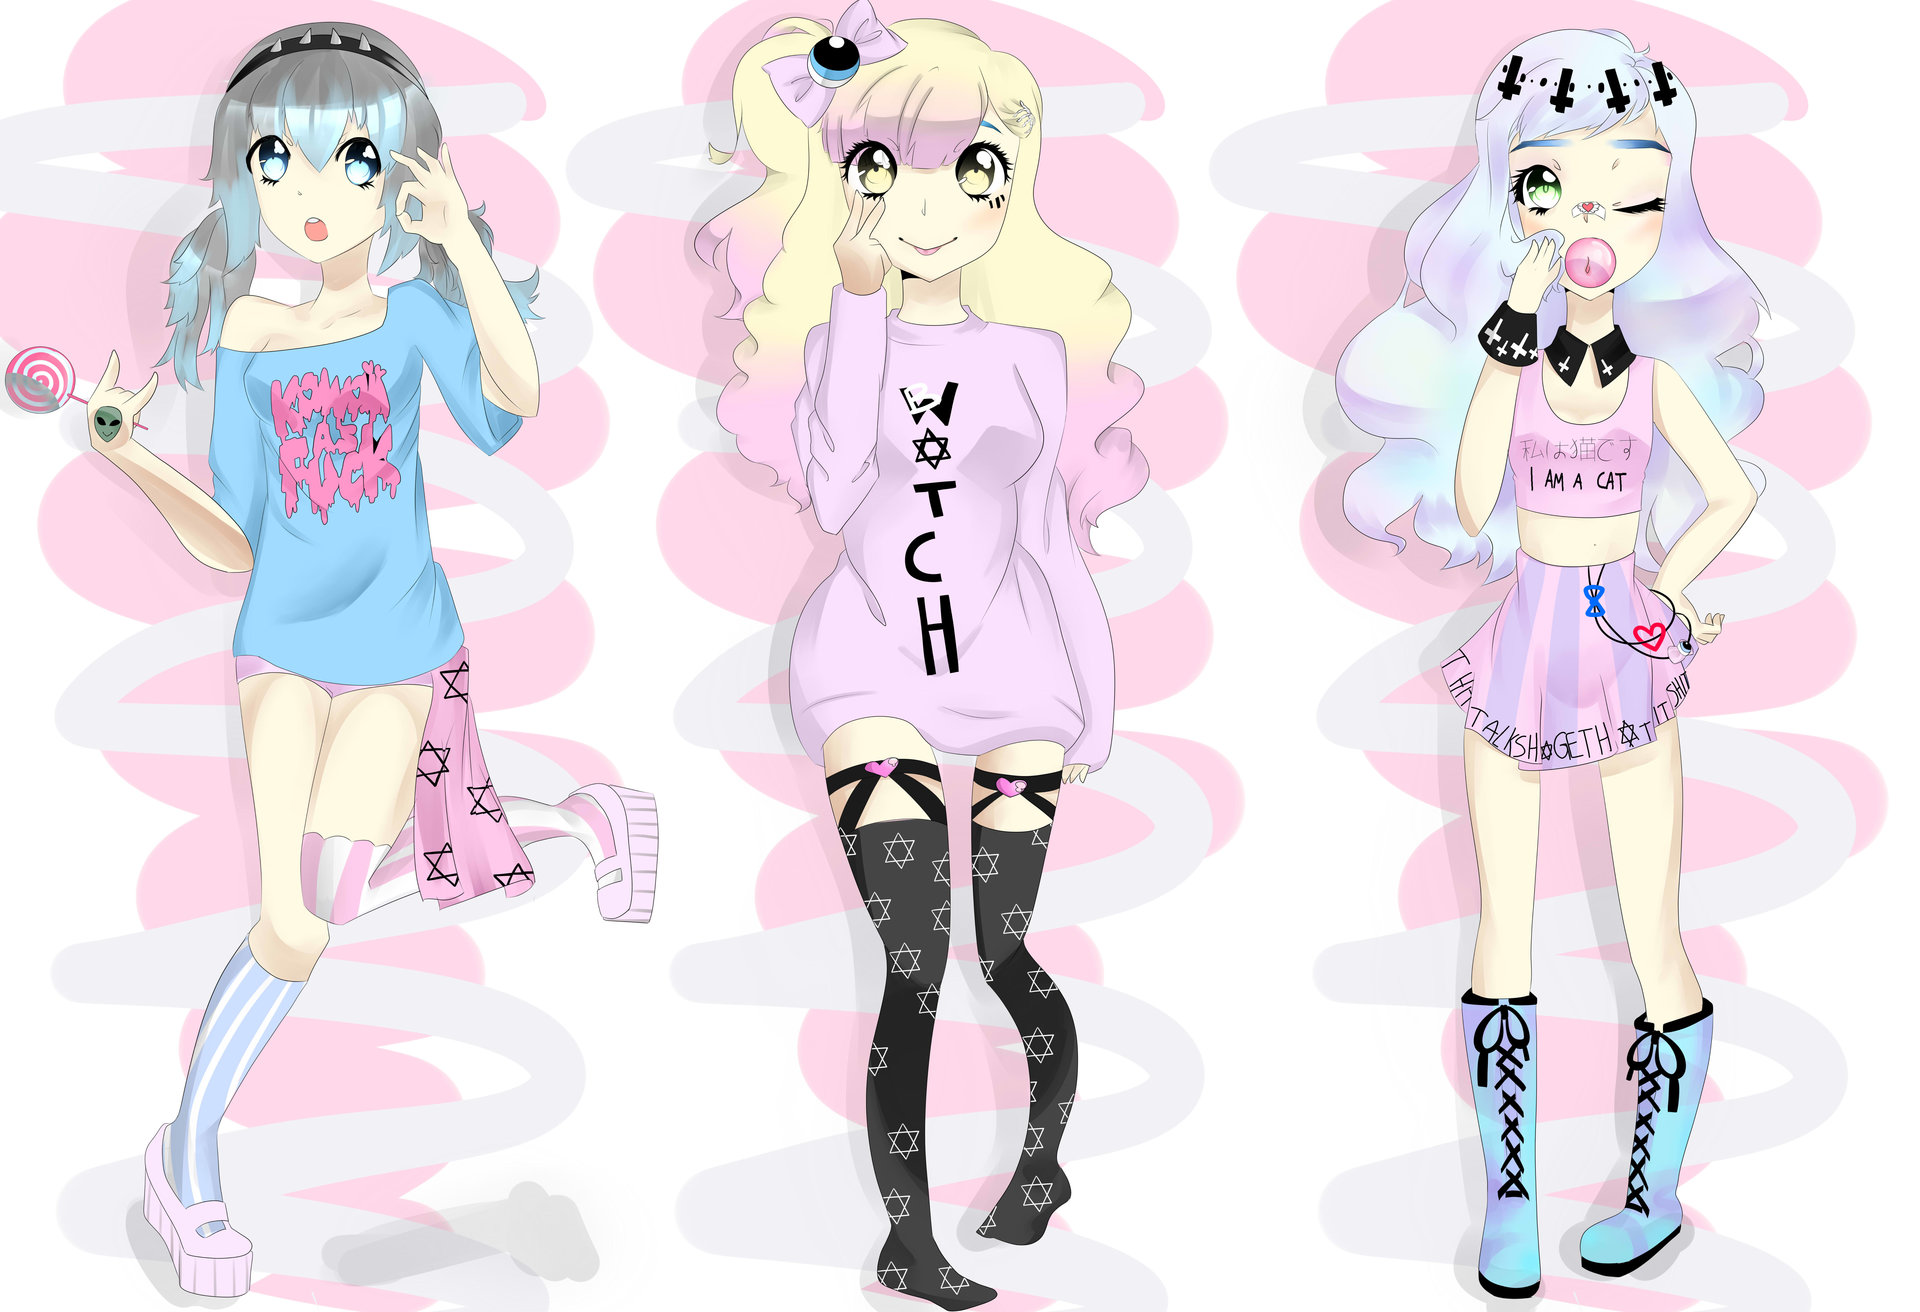 Pastel goth edition of 3 of my main OCs. 